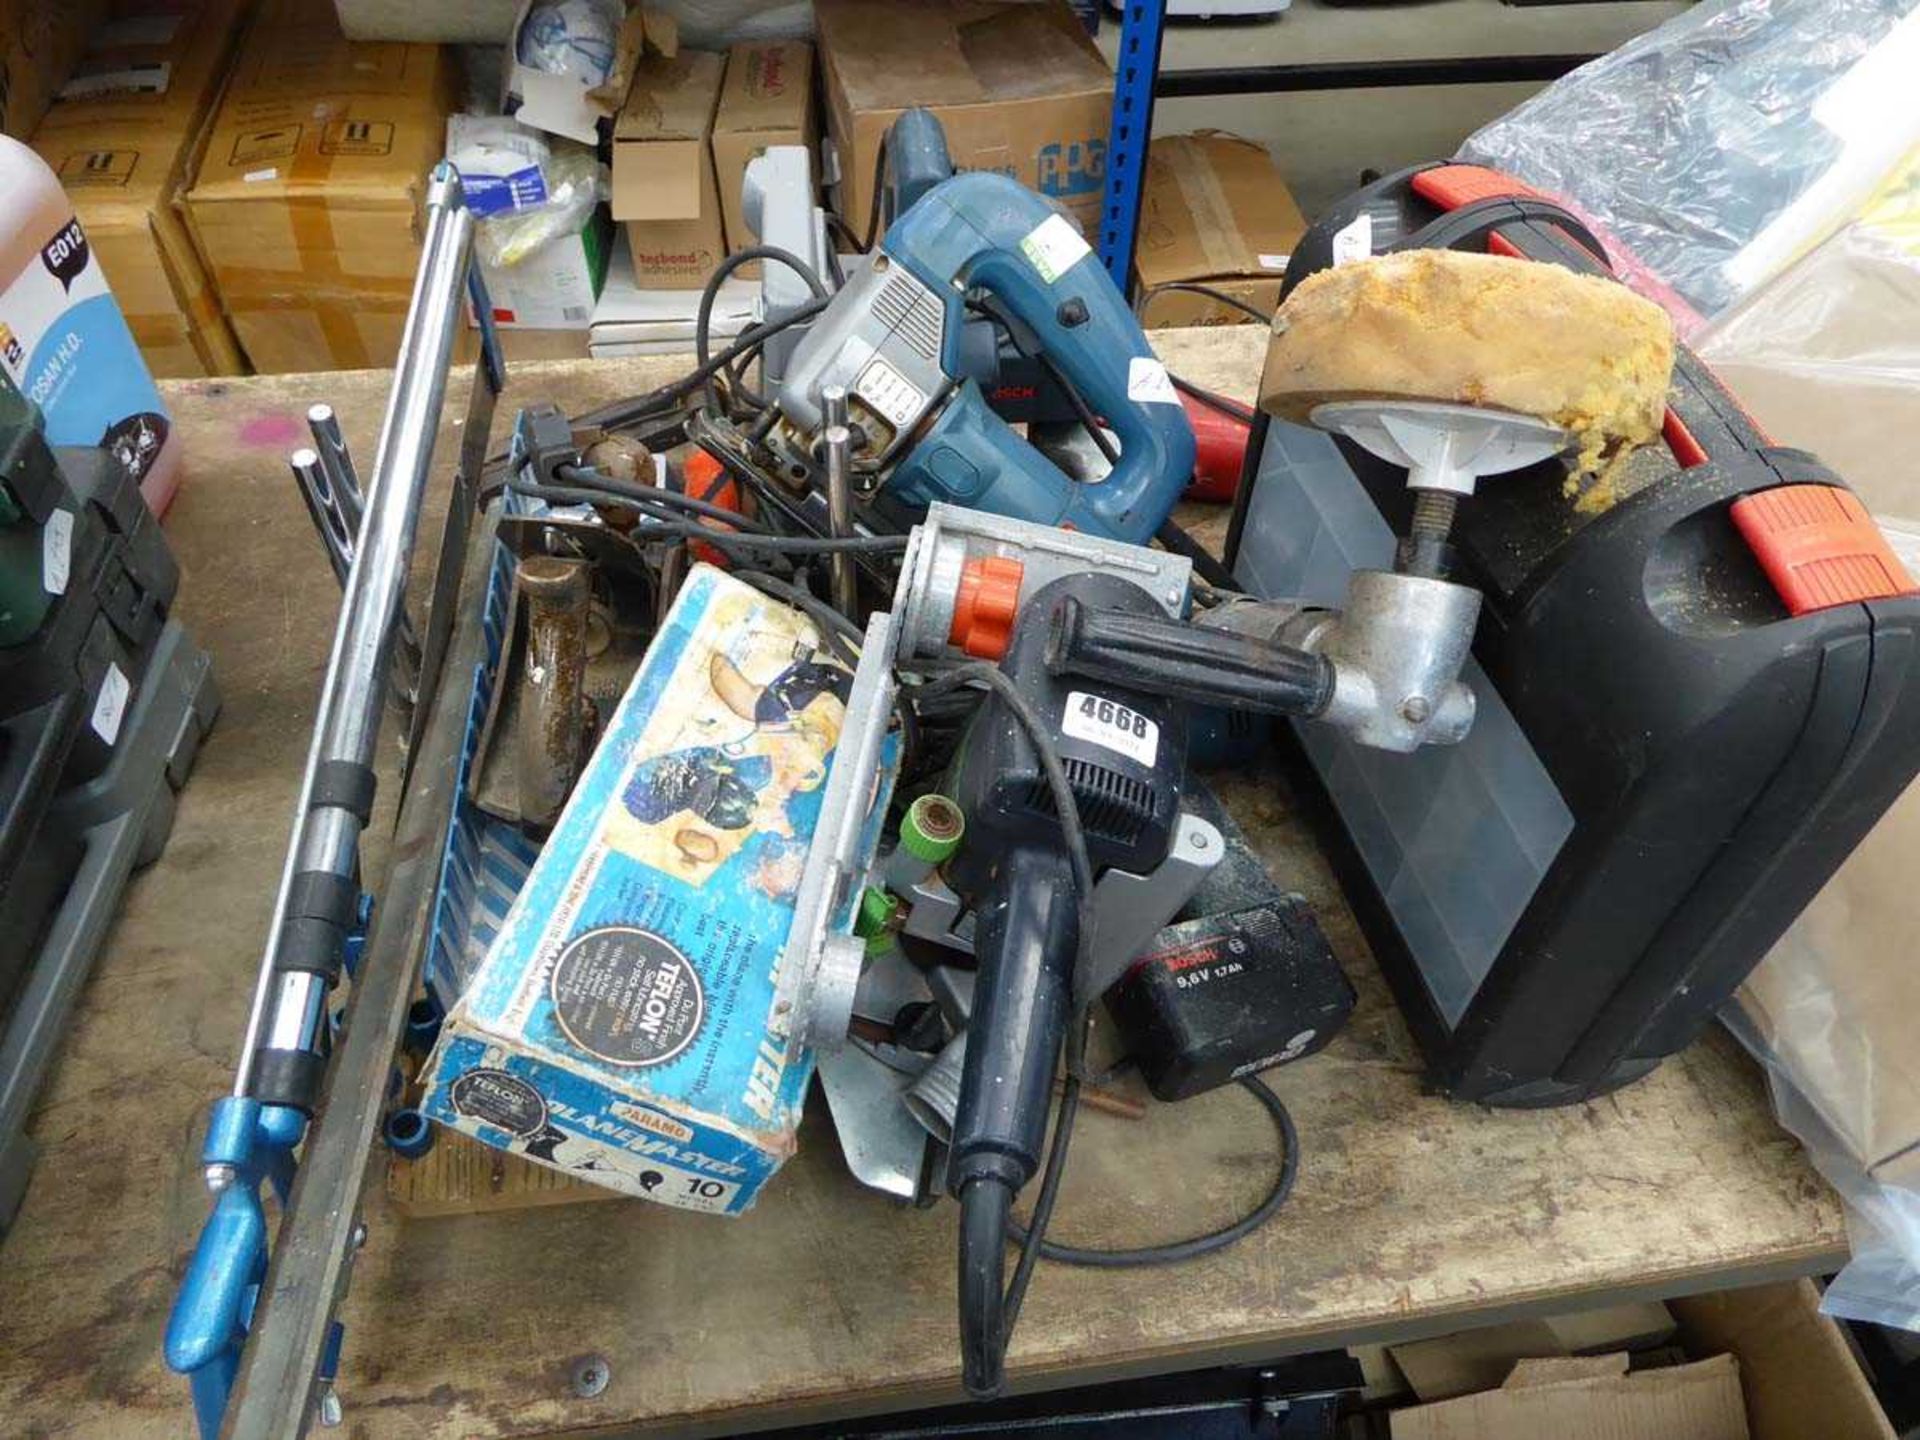 Large quantity of assorted tools including router, Bosch drill, jigsaw, circular saw and various